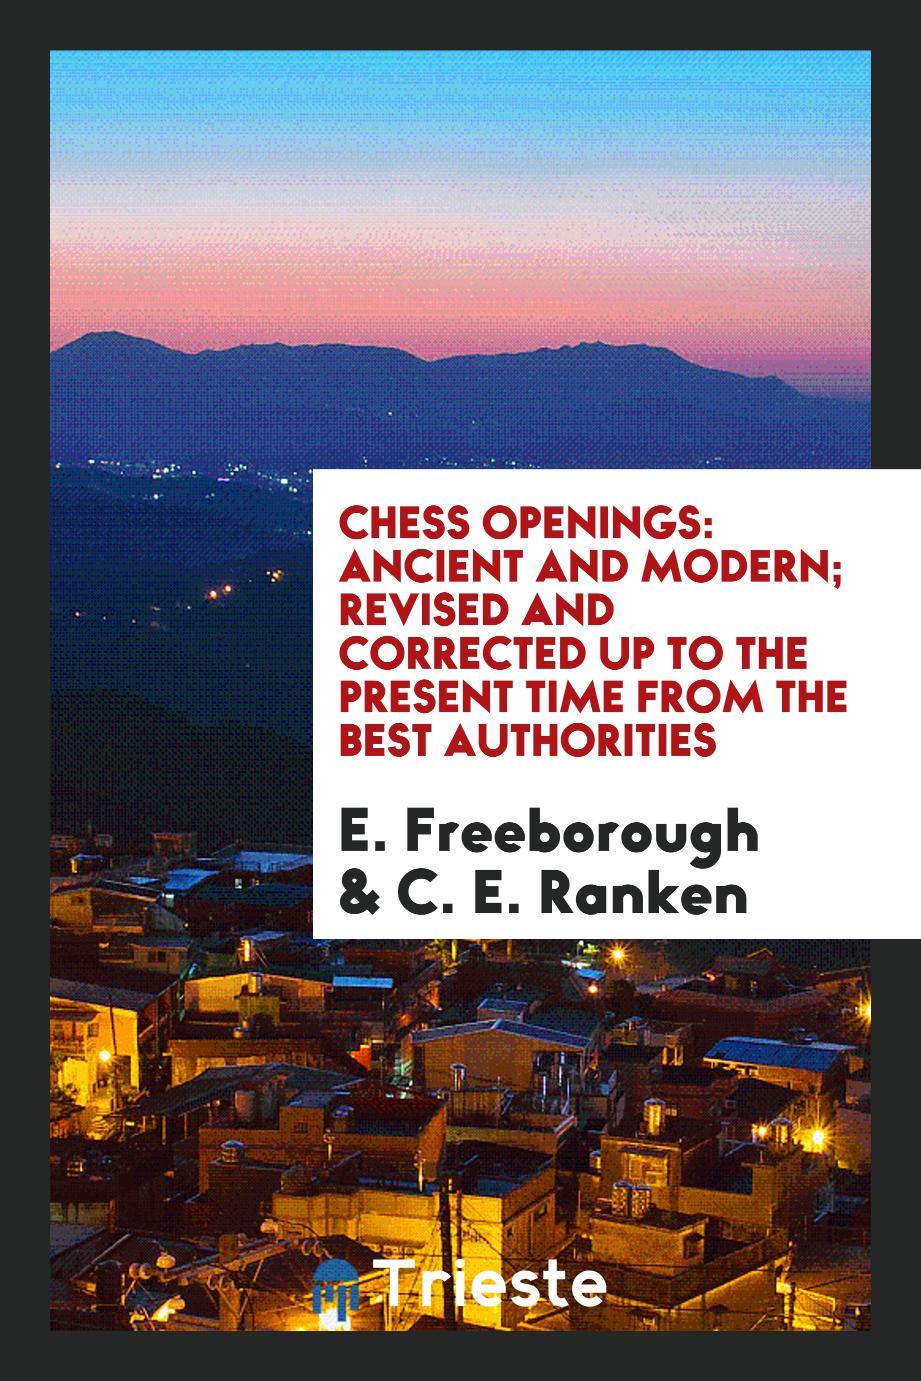 E. Freeborough, C. E. Ranken - Chess Openings: Ancient and Modern; Revised and Corrected up to the Present Time from the Best Authorities